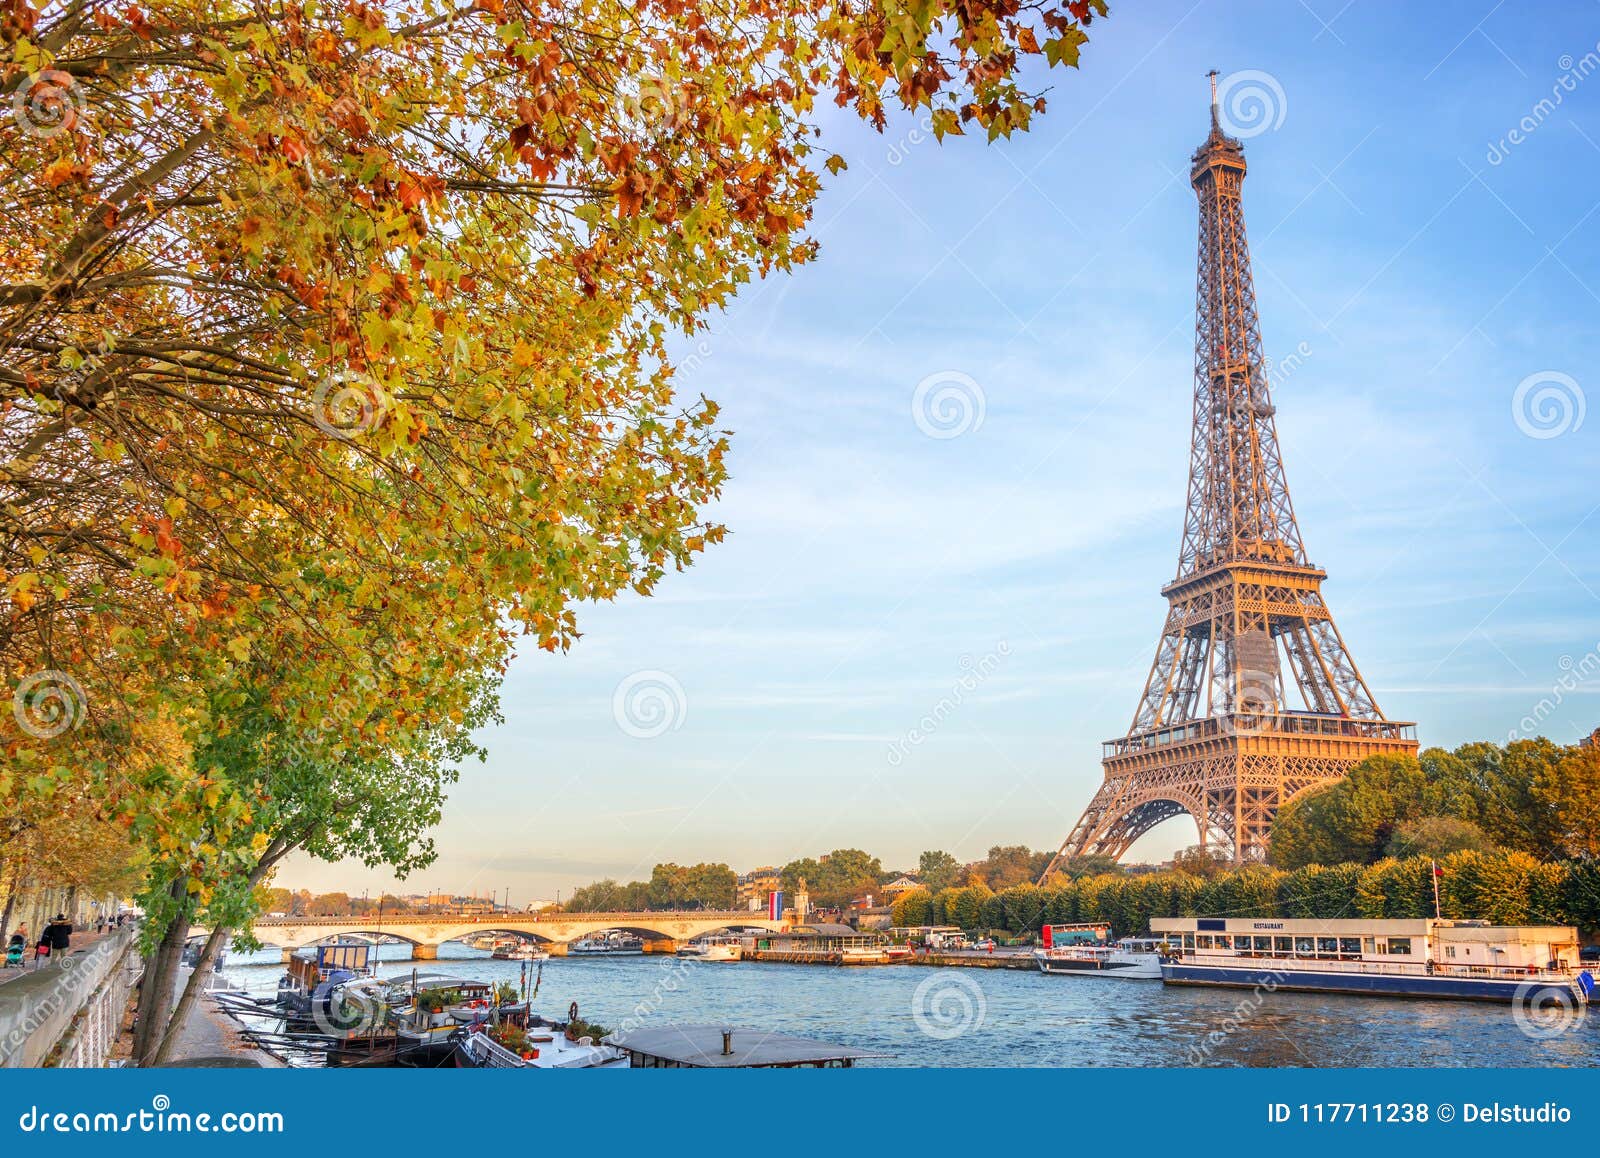 Eiffel Tower and the River Seine, Yellow Automnal Trees, Paris France